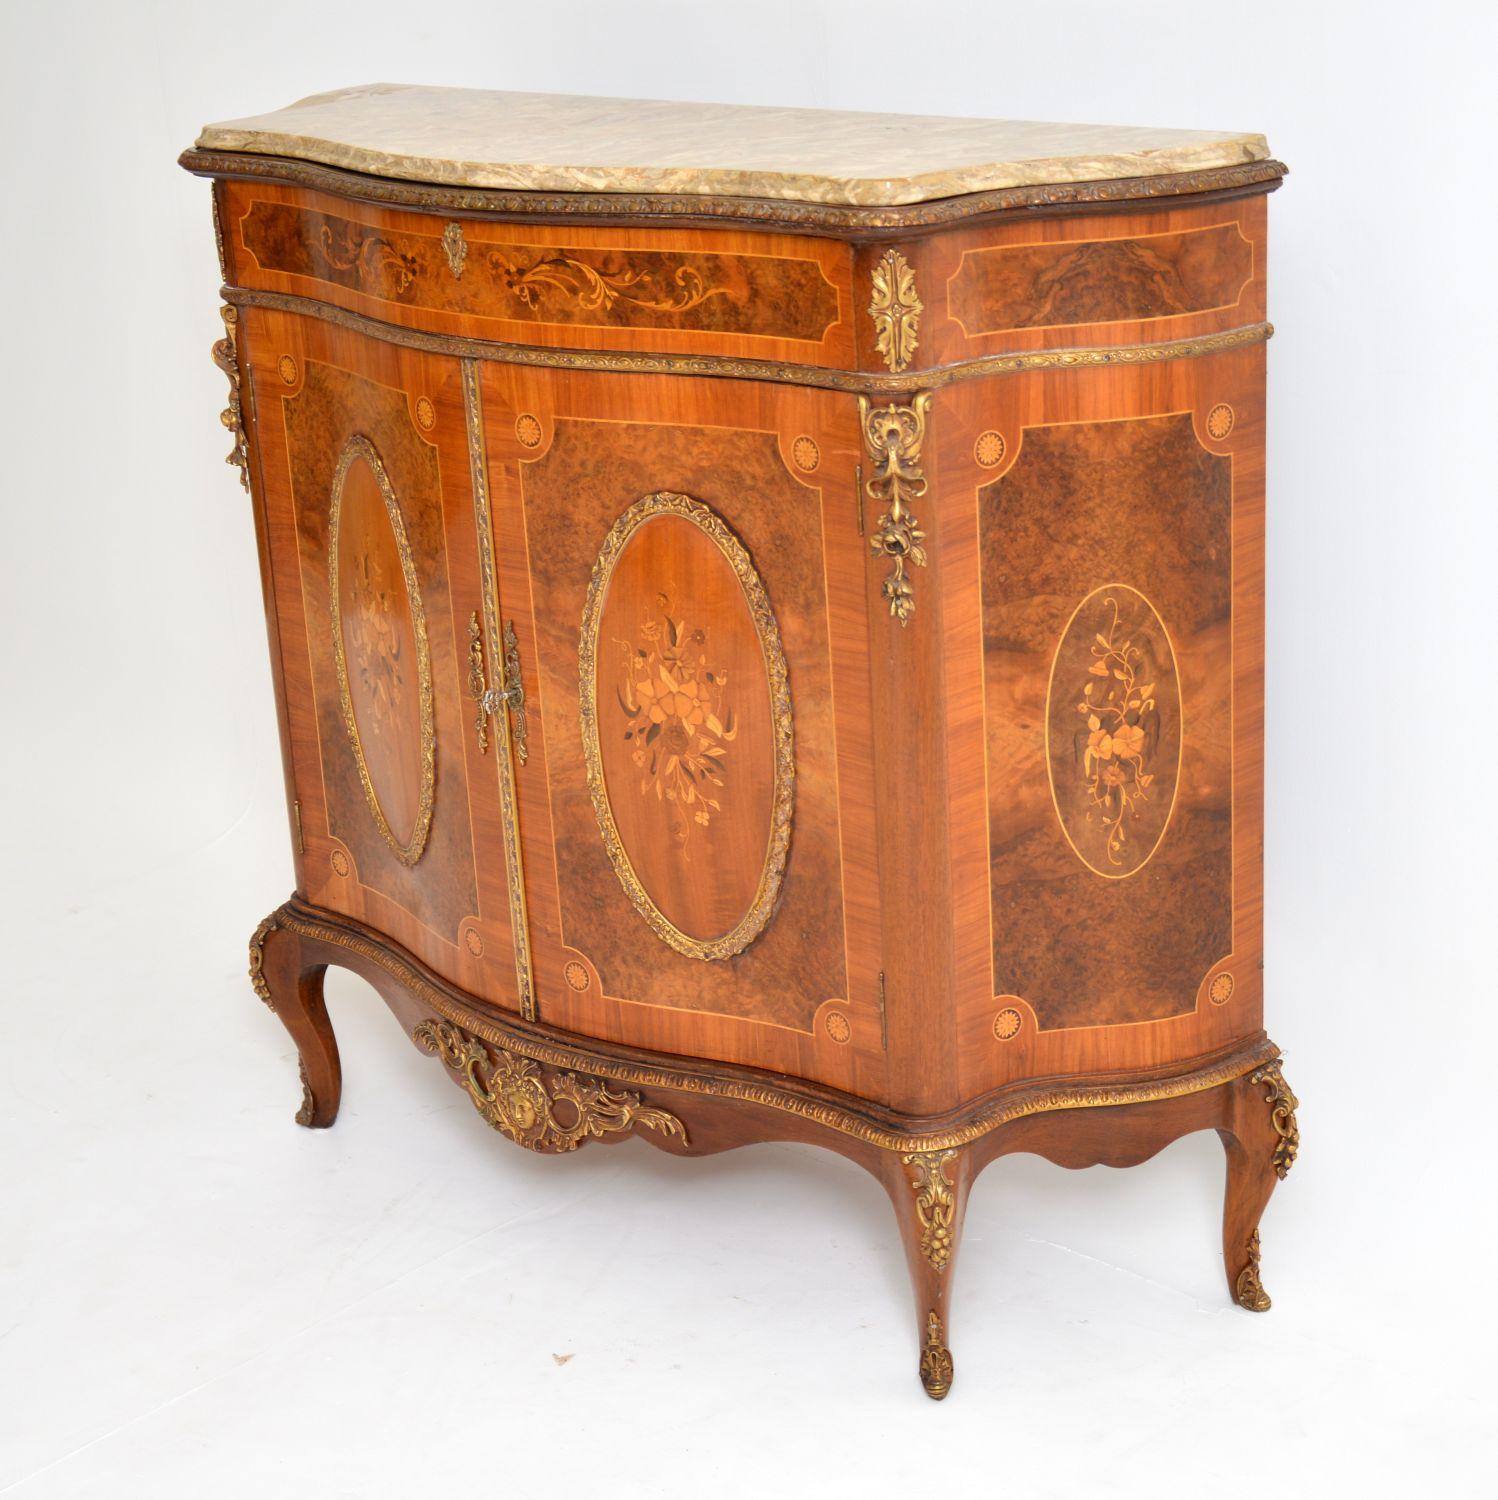 Antique French style marble top cabinet with stunning floral marquetry panels made up of many exotic woods and inset into burr walnut surroundings. The middle oval panels are convexed and surrounded by gilt bronze mounts. The gilt bronze mounts are